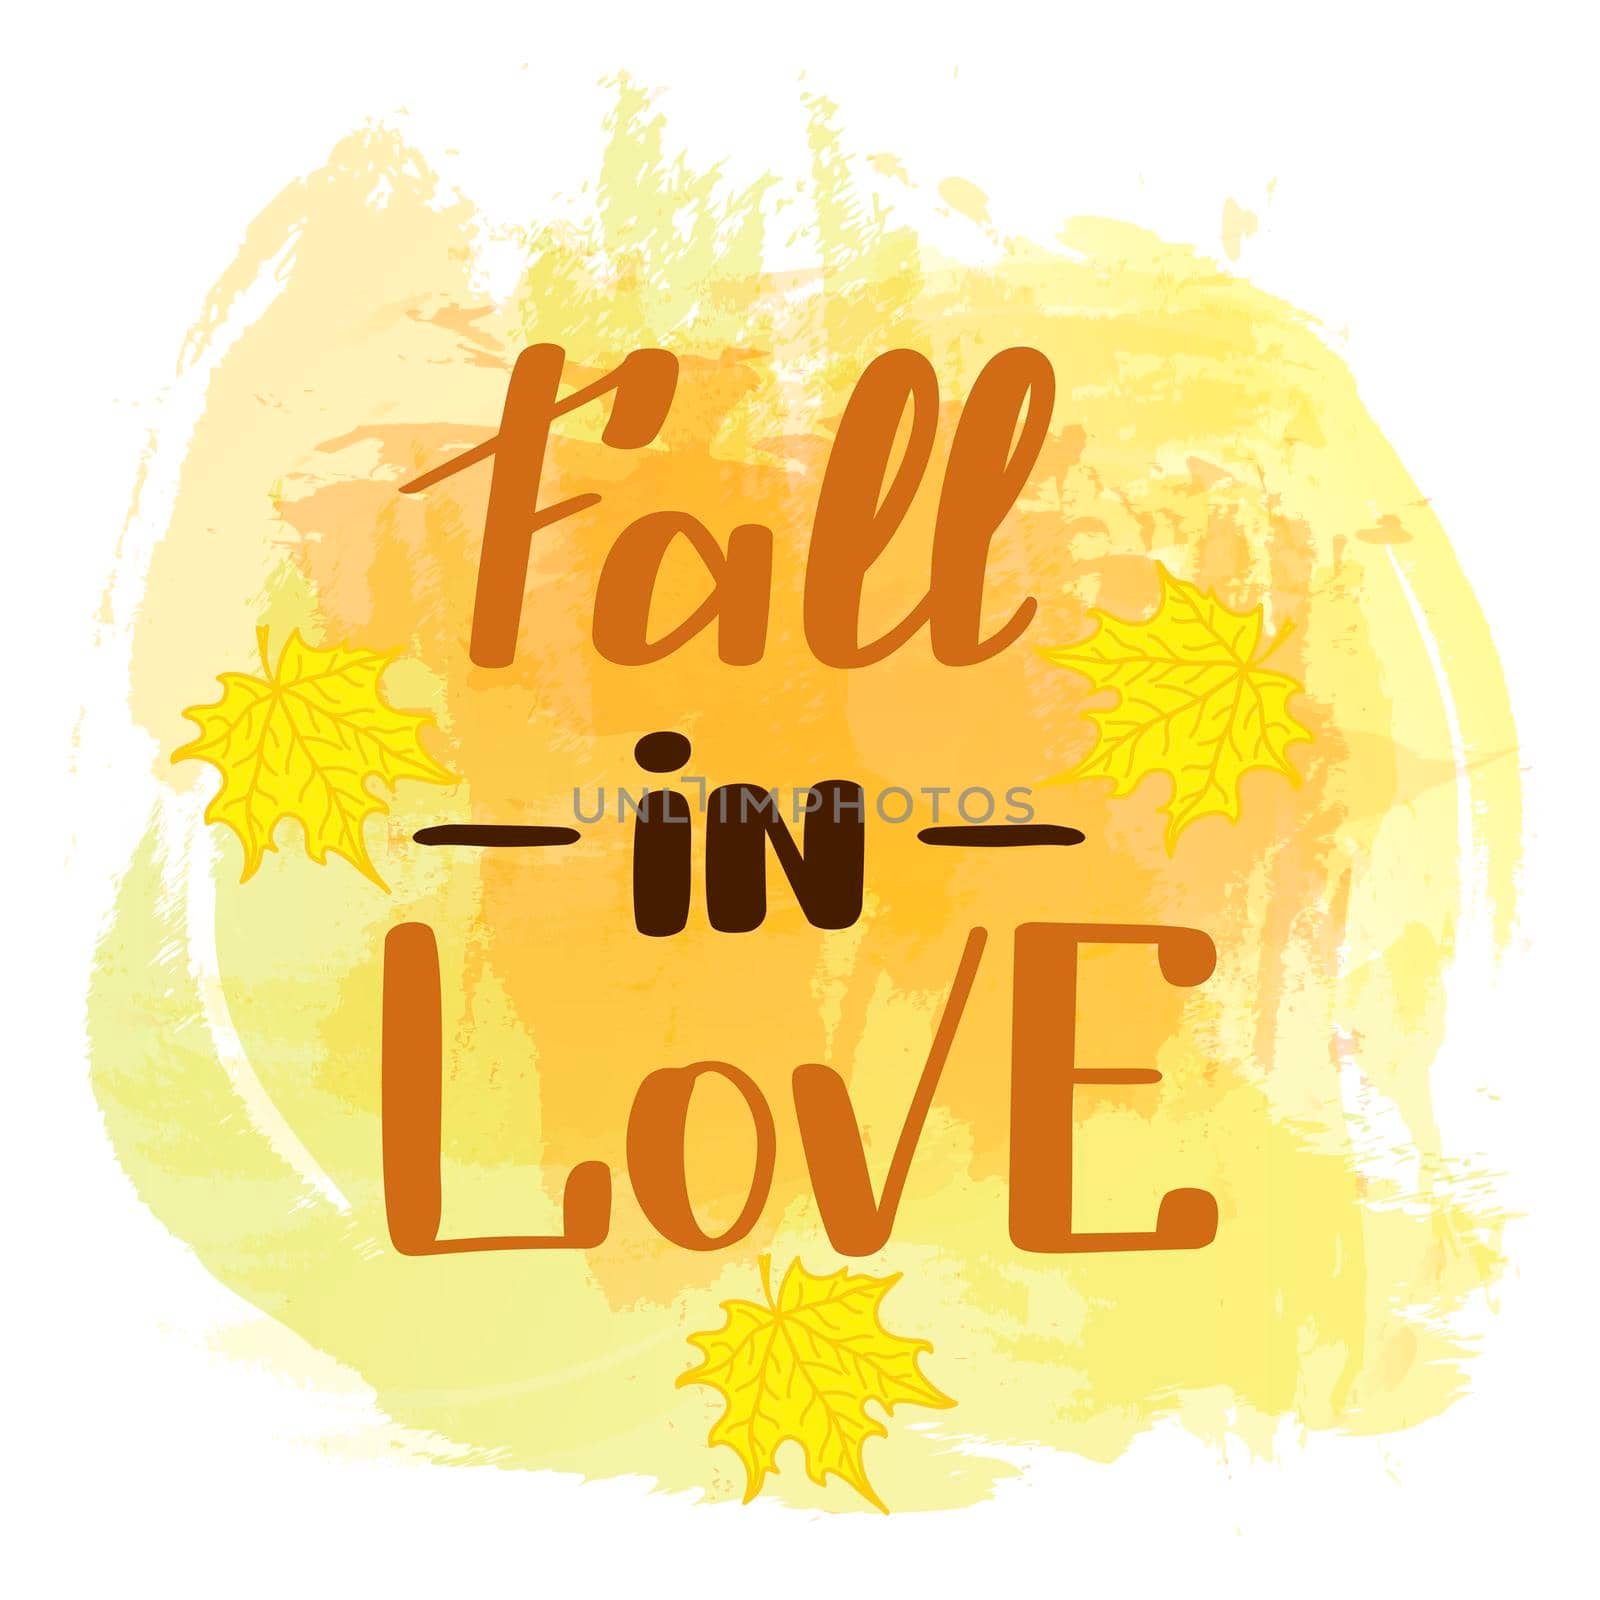 Fall in love. Handwritten lettering on watercolor background. illustration for posters, cards and much more.